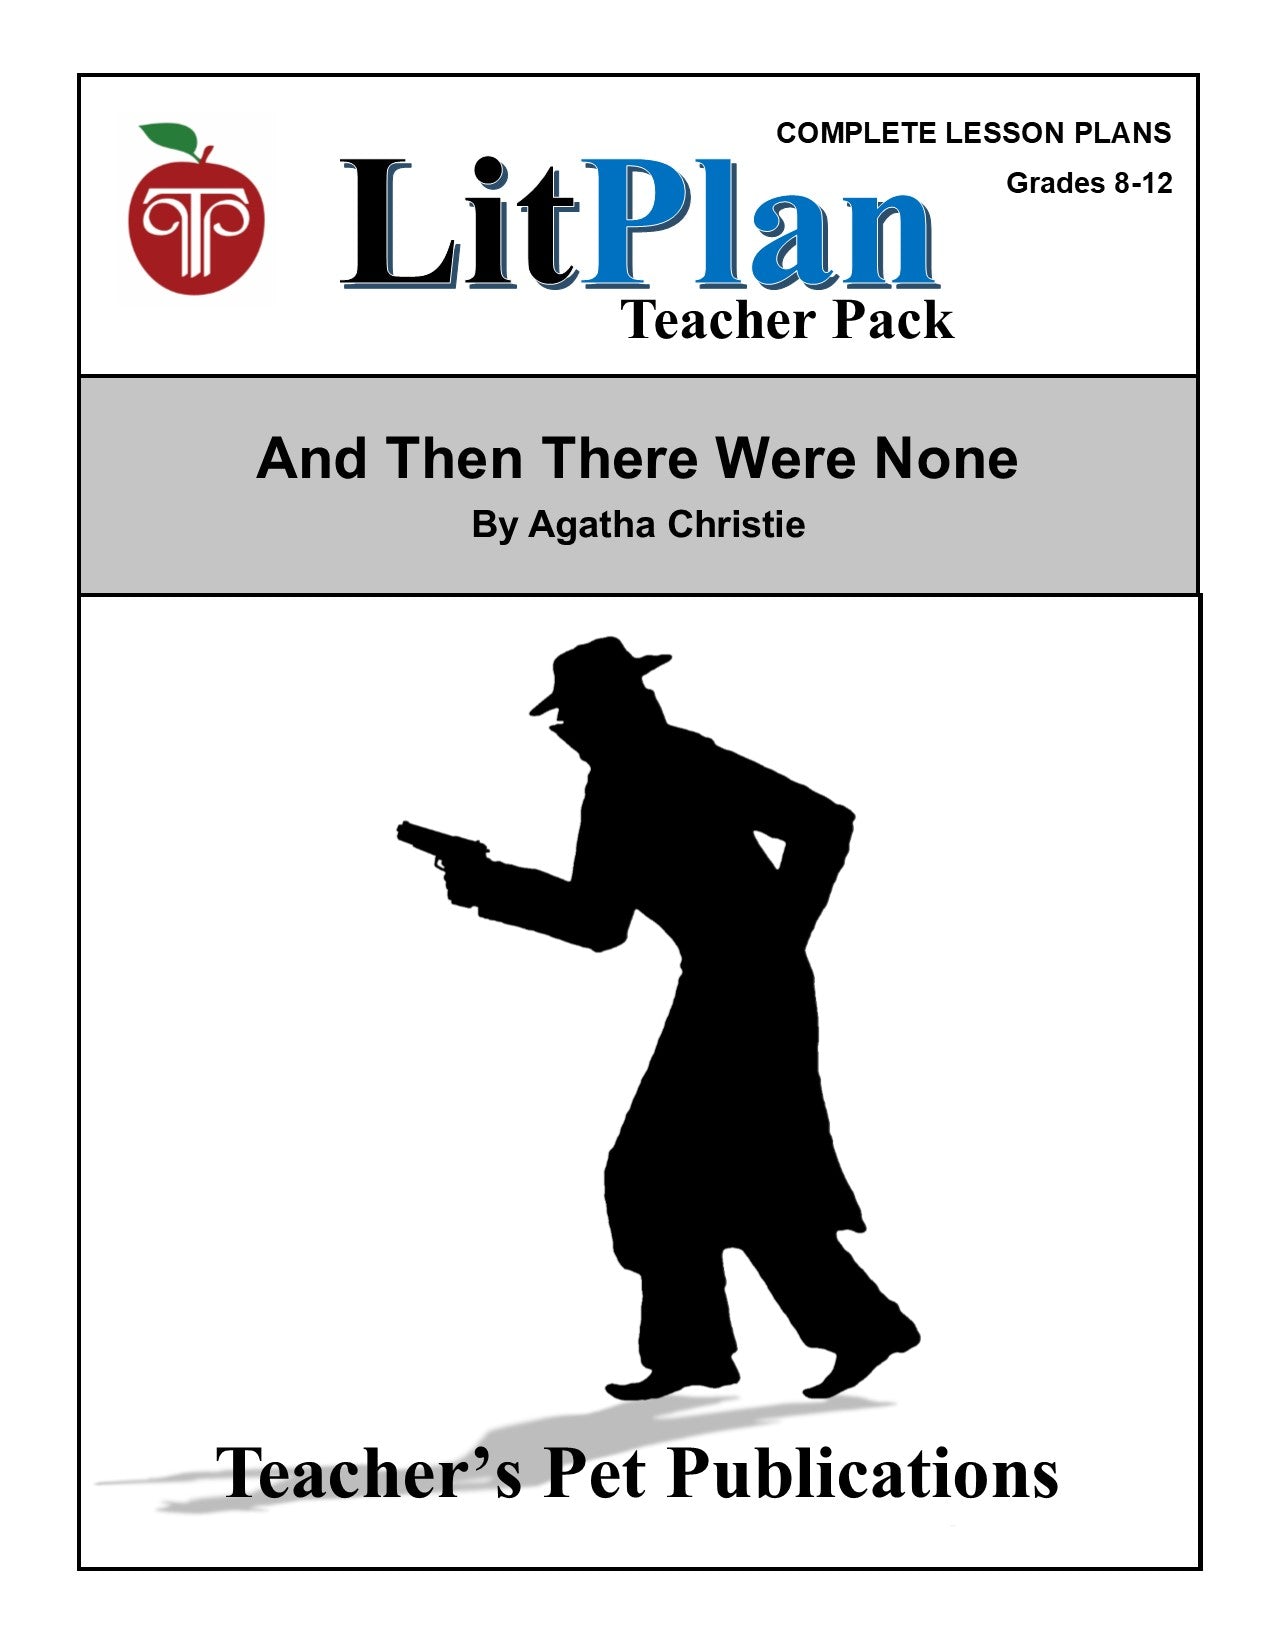 And Then There Were None: LitPlan Teacher Pack Grades 8-12